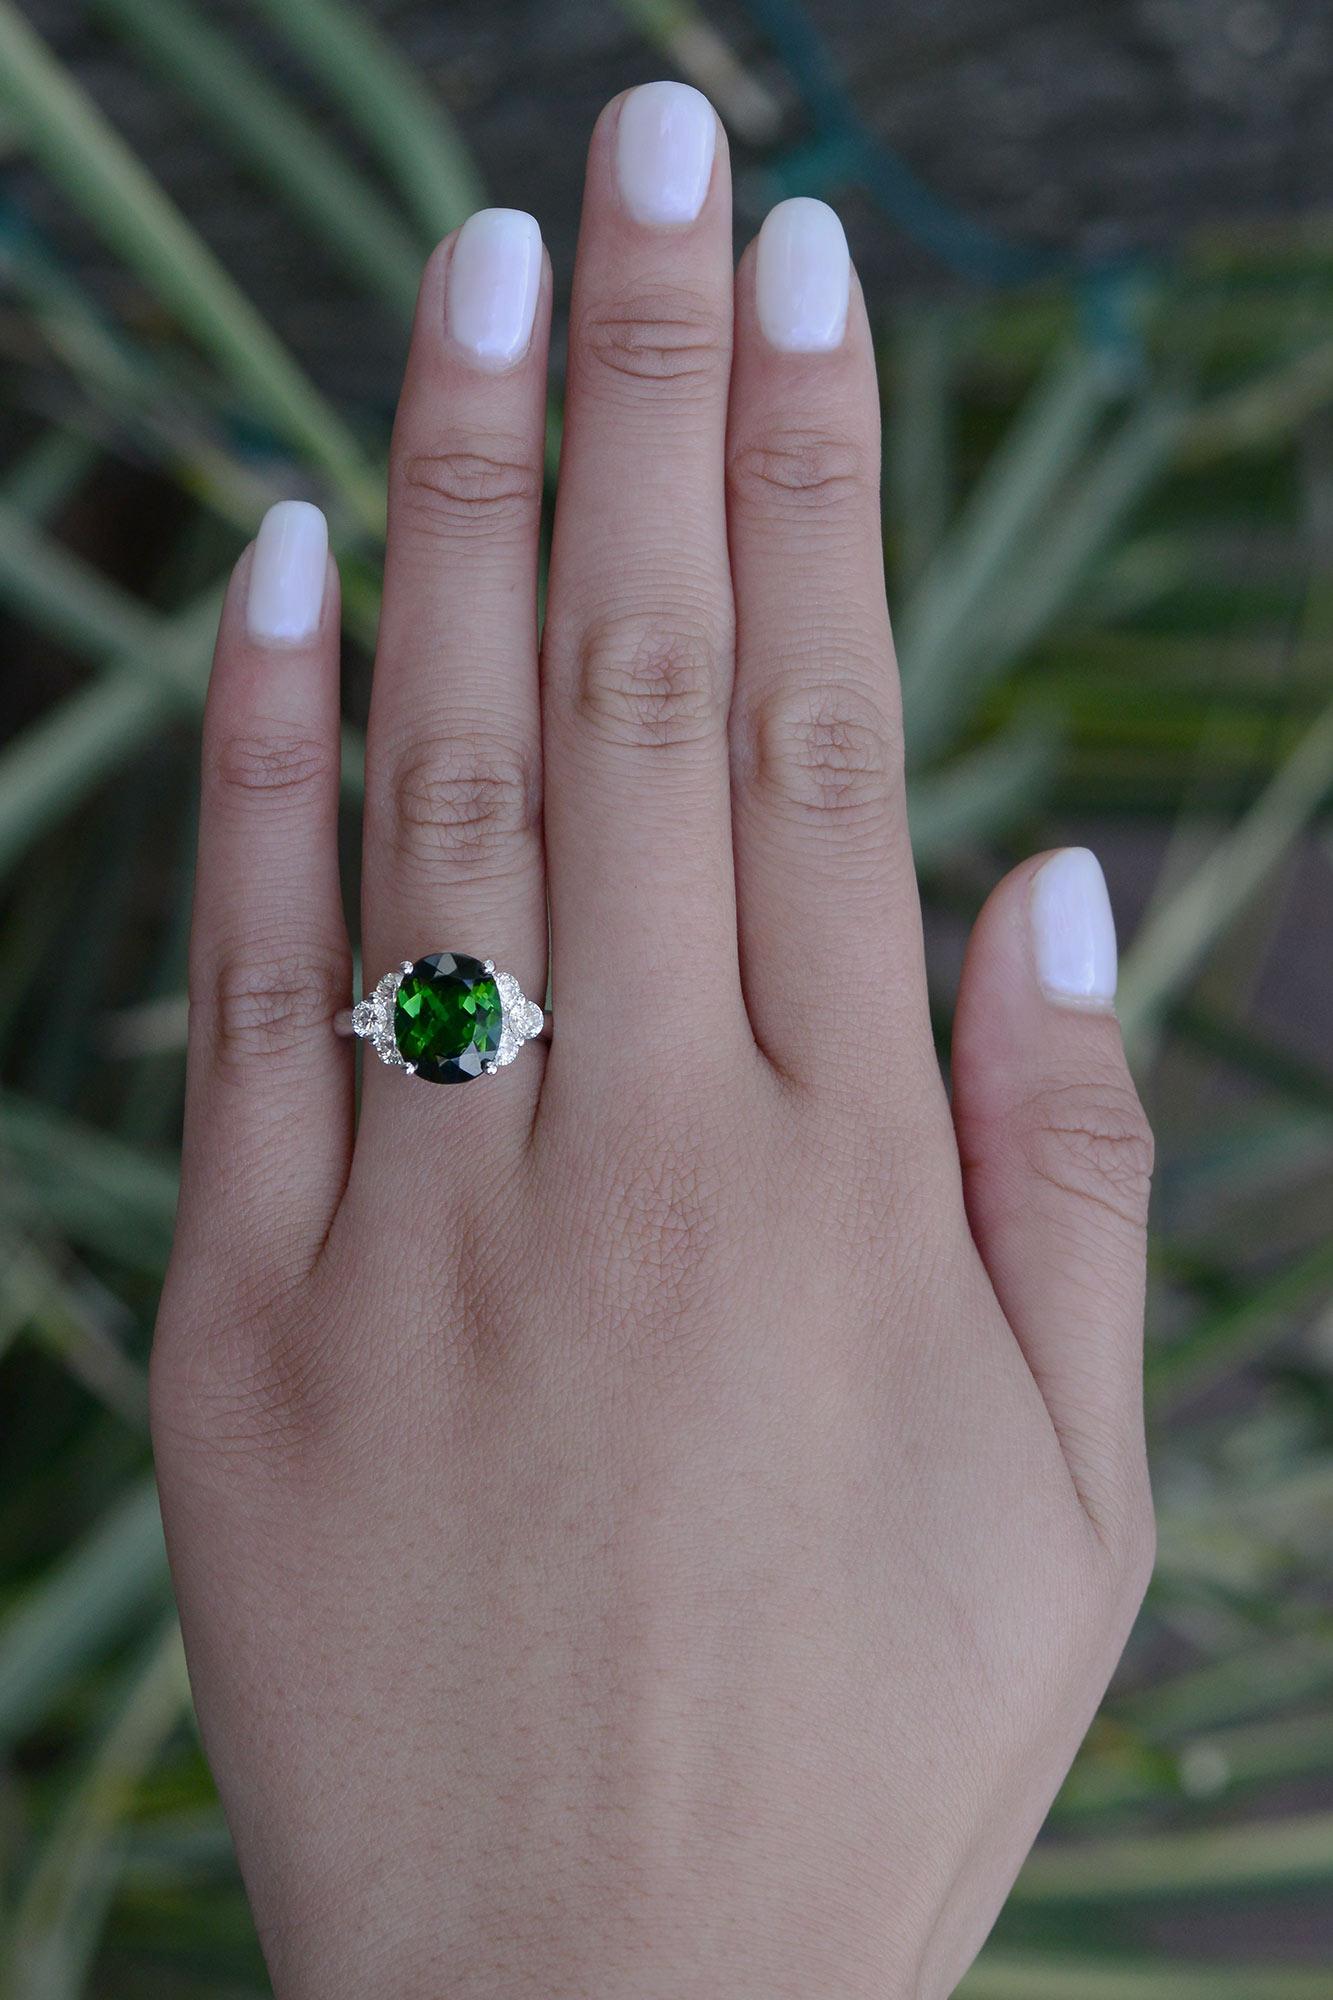 Centered by a rich, deeply saturated forest green tourmaline, this oval gemstone engagement ring is an affordable luxury. The substantial setting is hand crafted of 18kt white gold, holding a glorious gem weighing 4.16 carats, complimented by 1